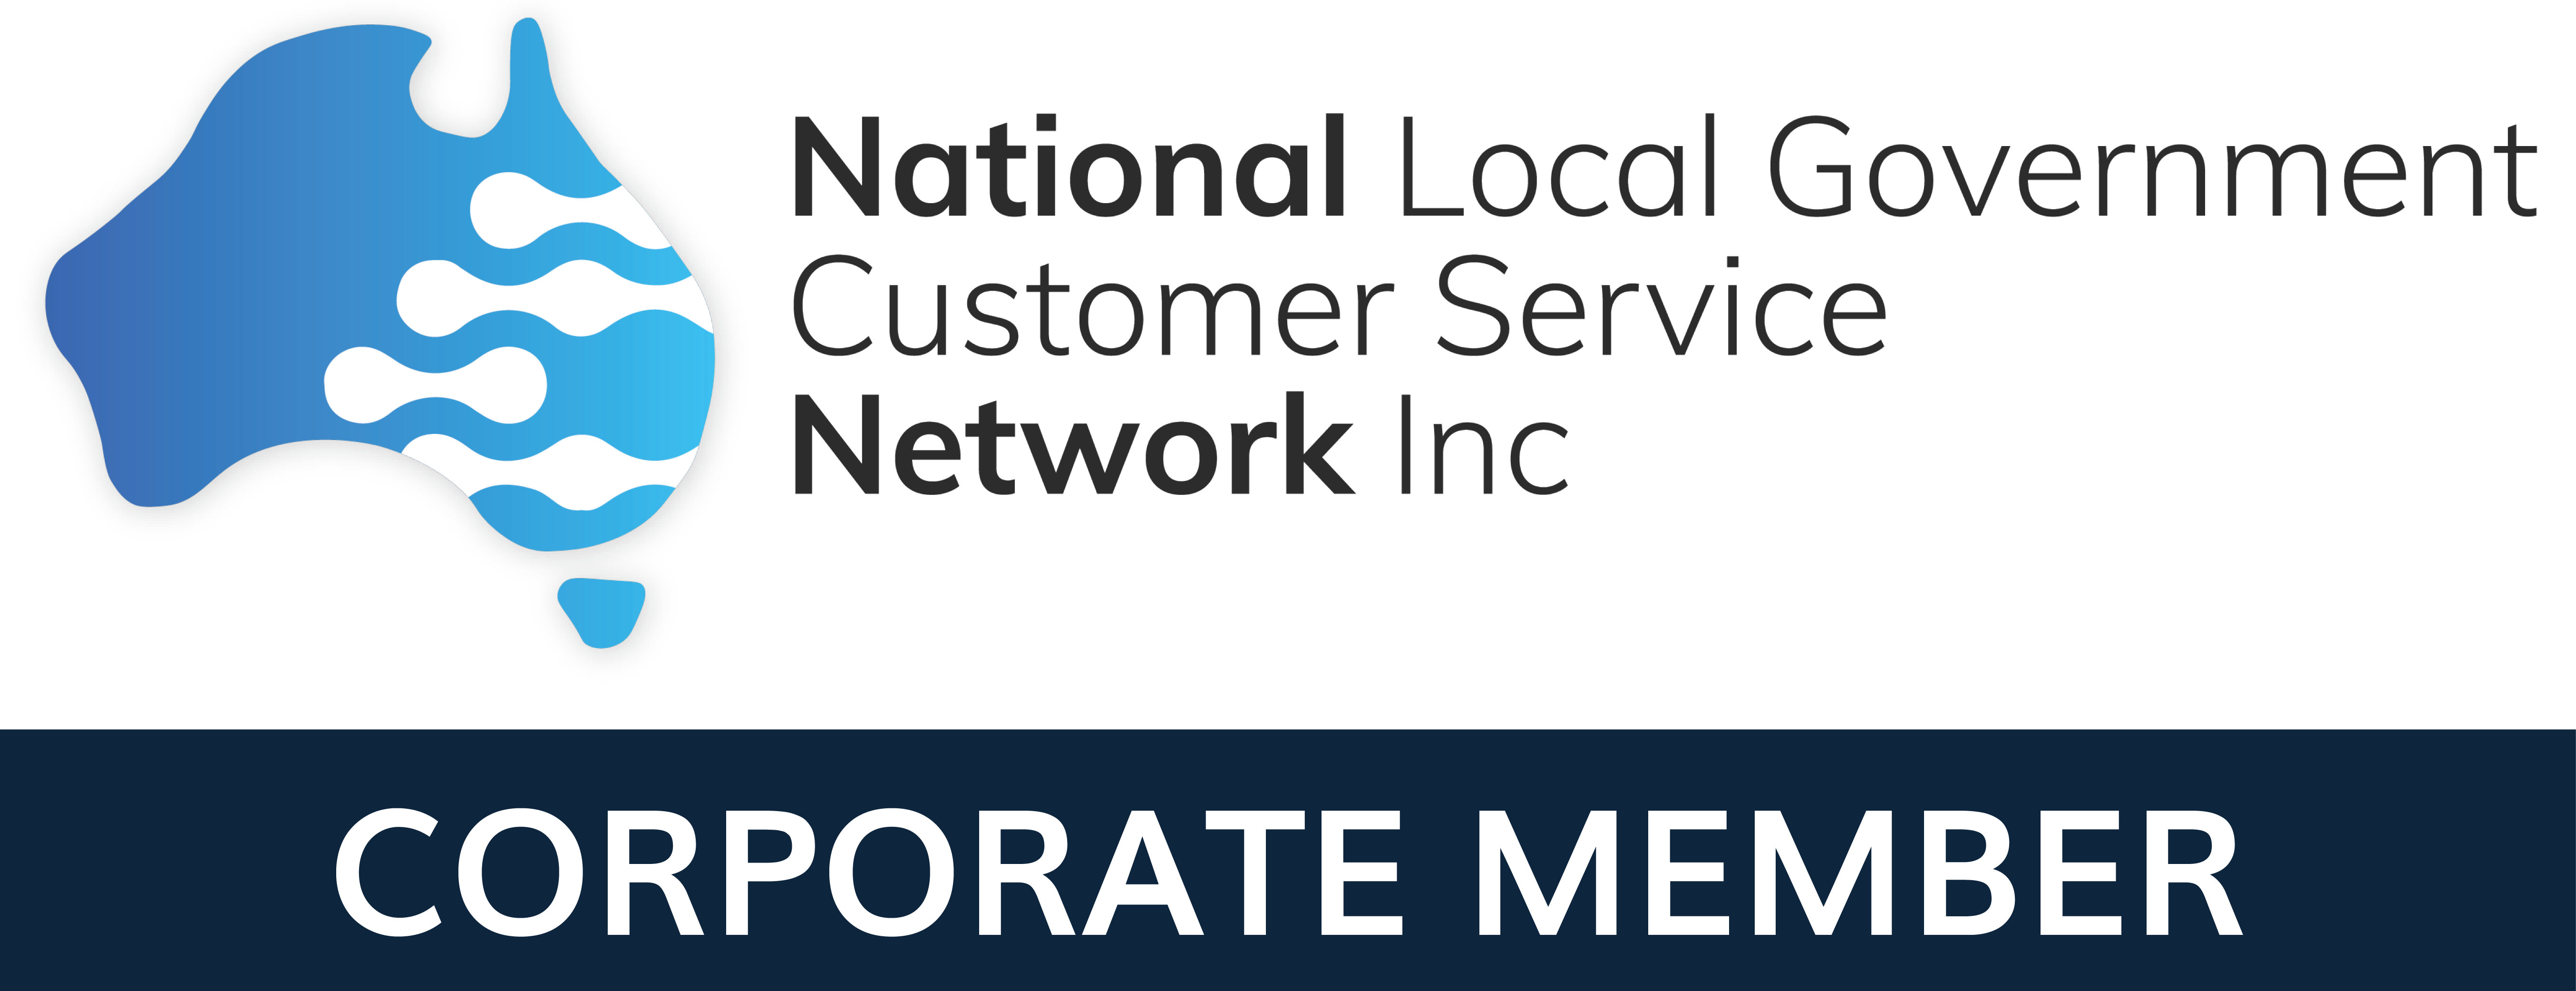 Well Done is a corporate member of the National Local Government Customer Service Network.